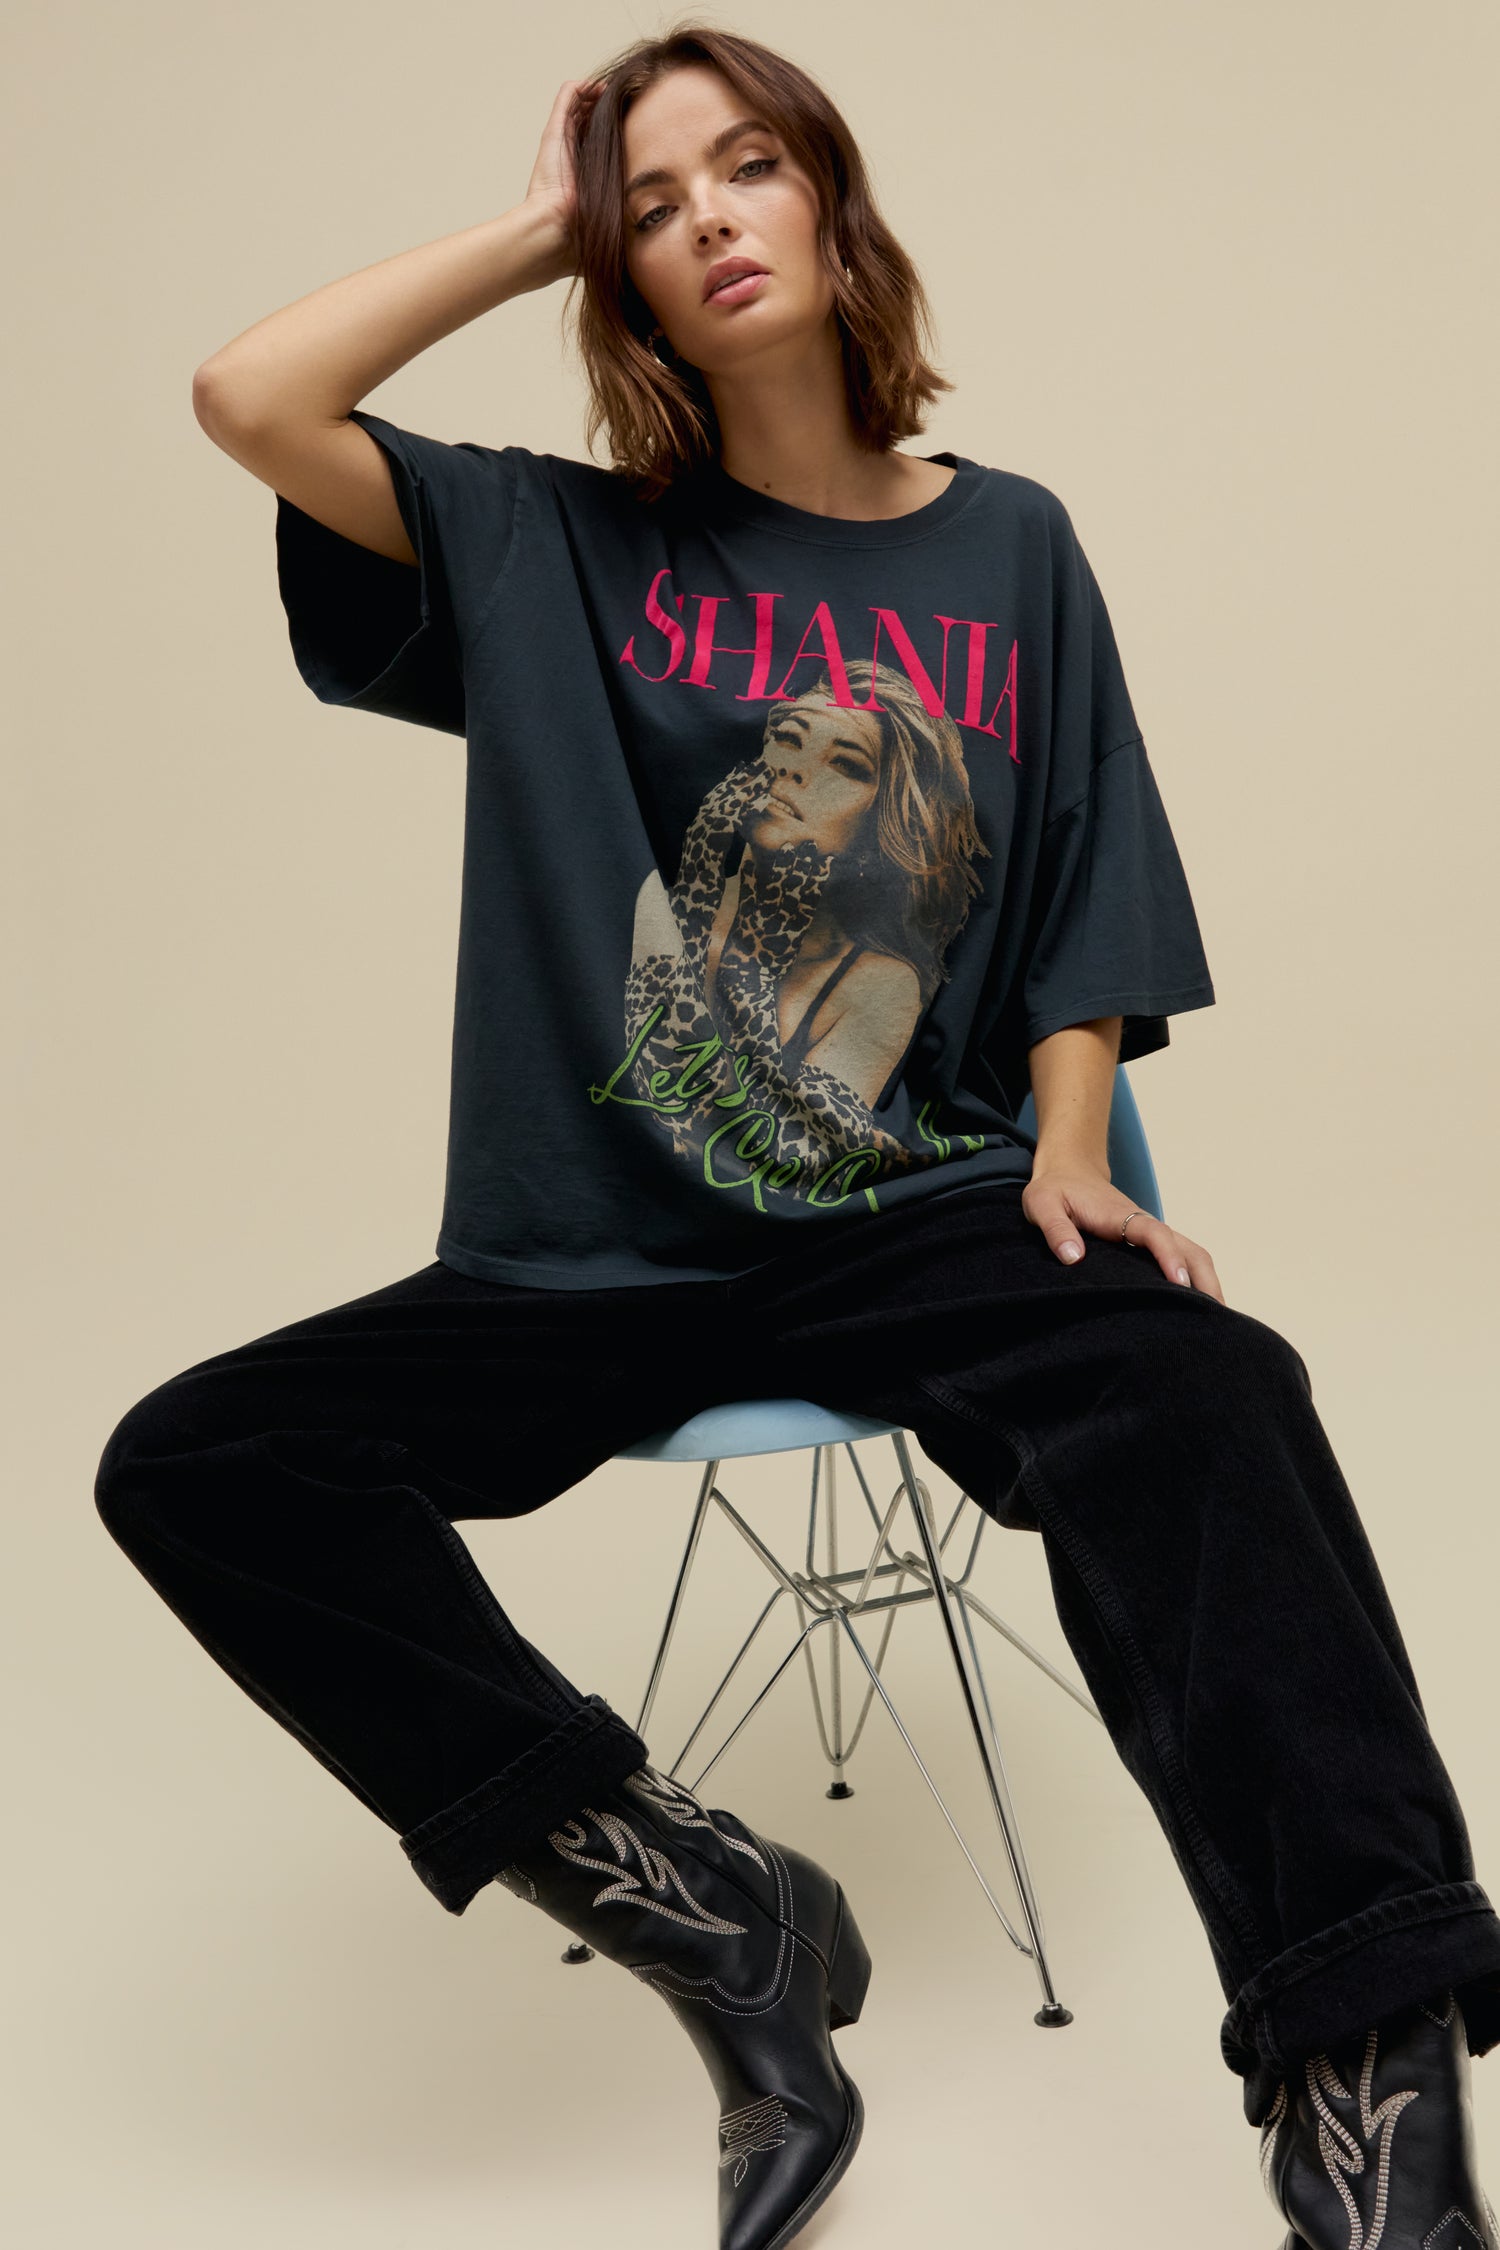 Model wearing an oversized Shania Twain 'Let's Go Girls' graphic tee in vintage black